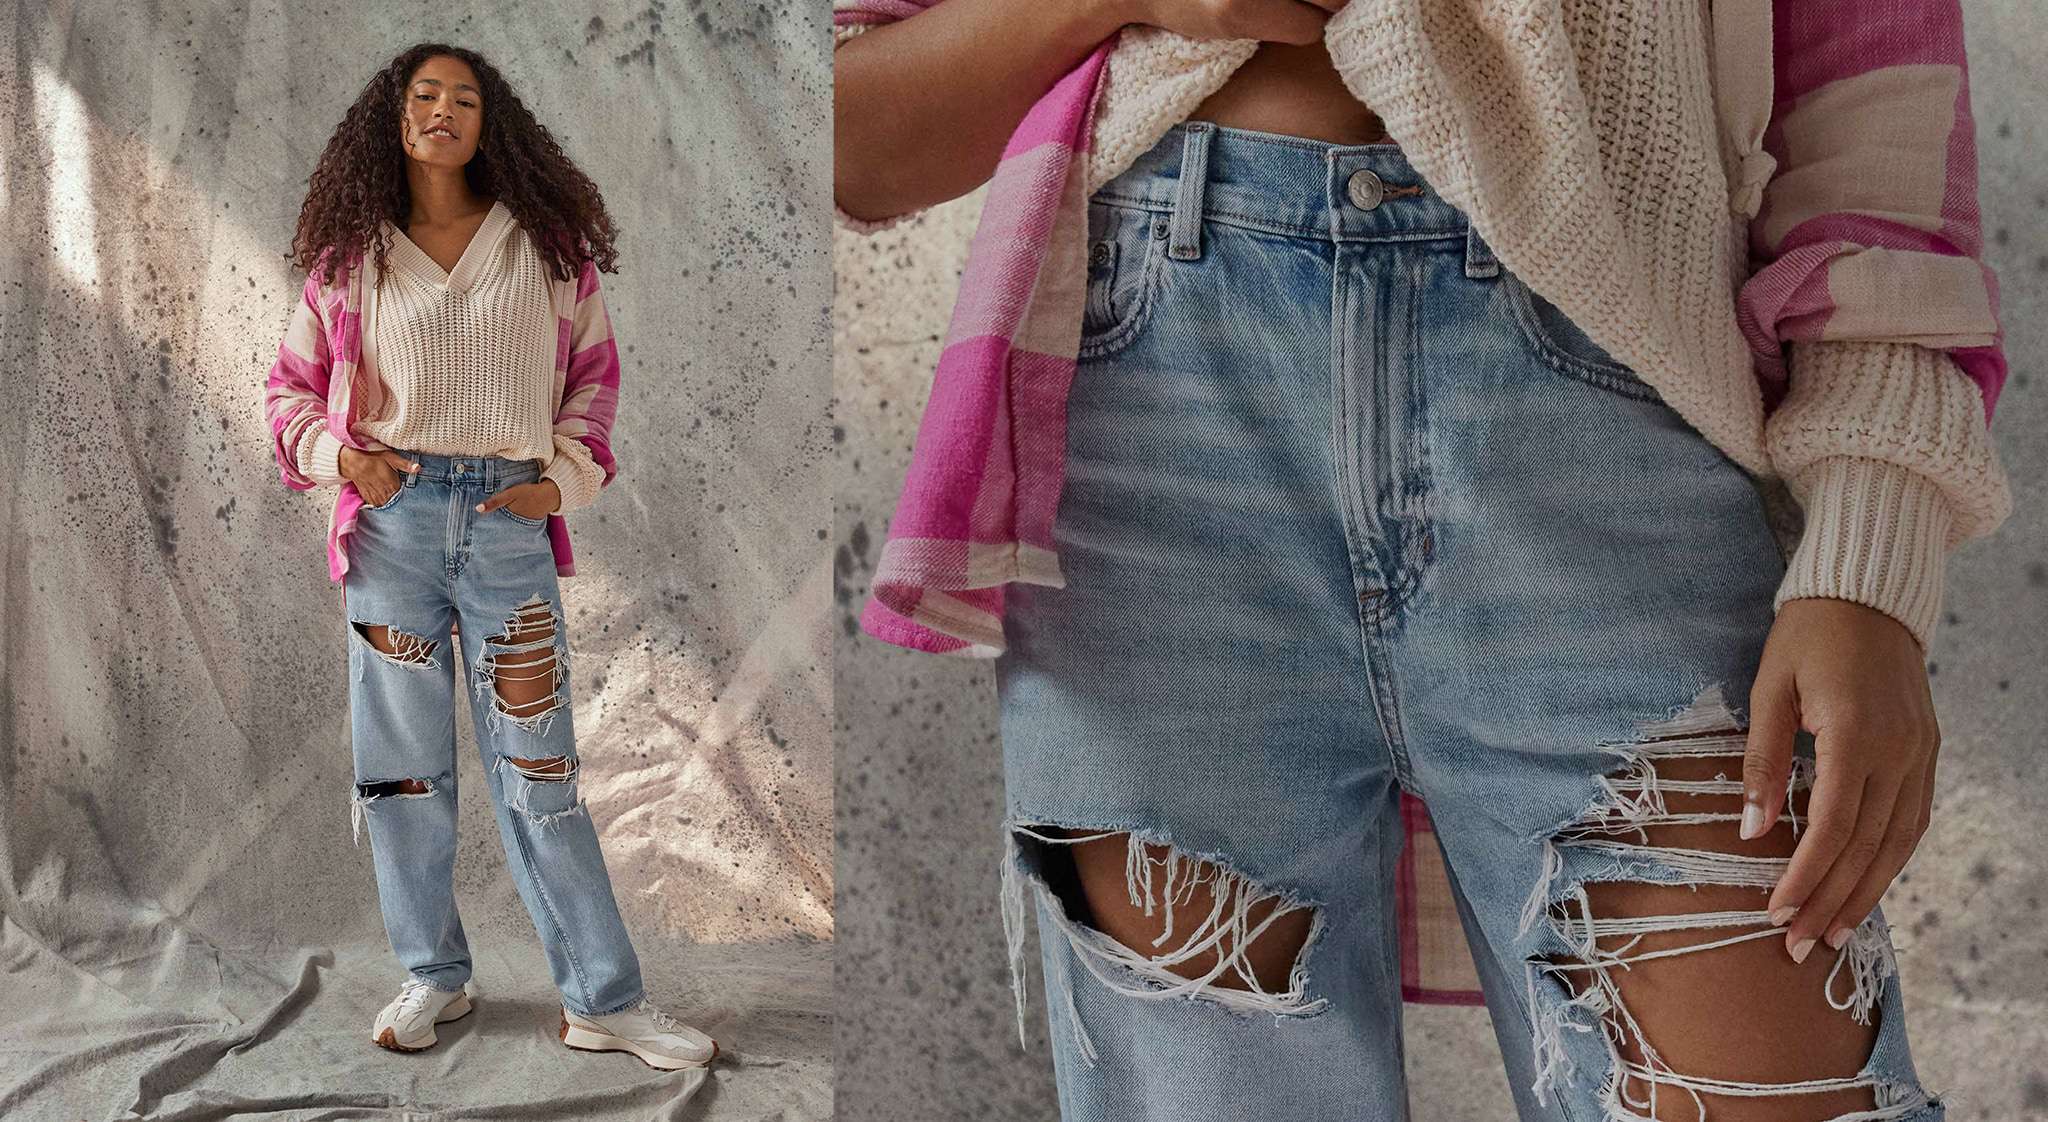 model standing on backdrop wearing baggy ripped jeans